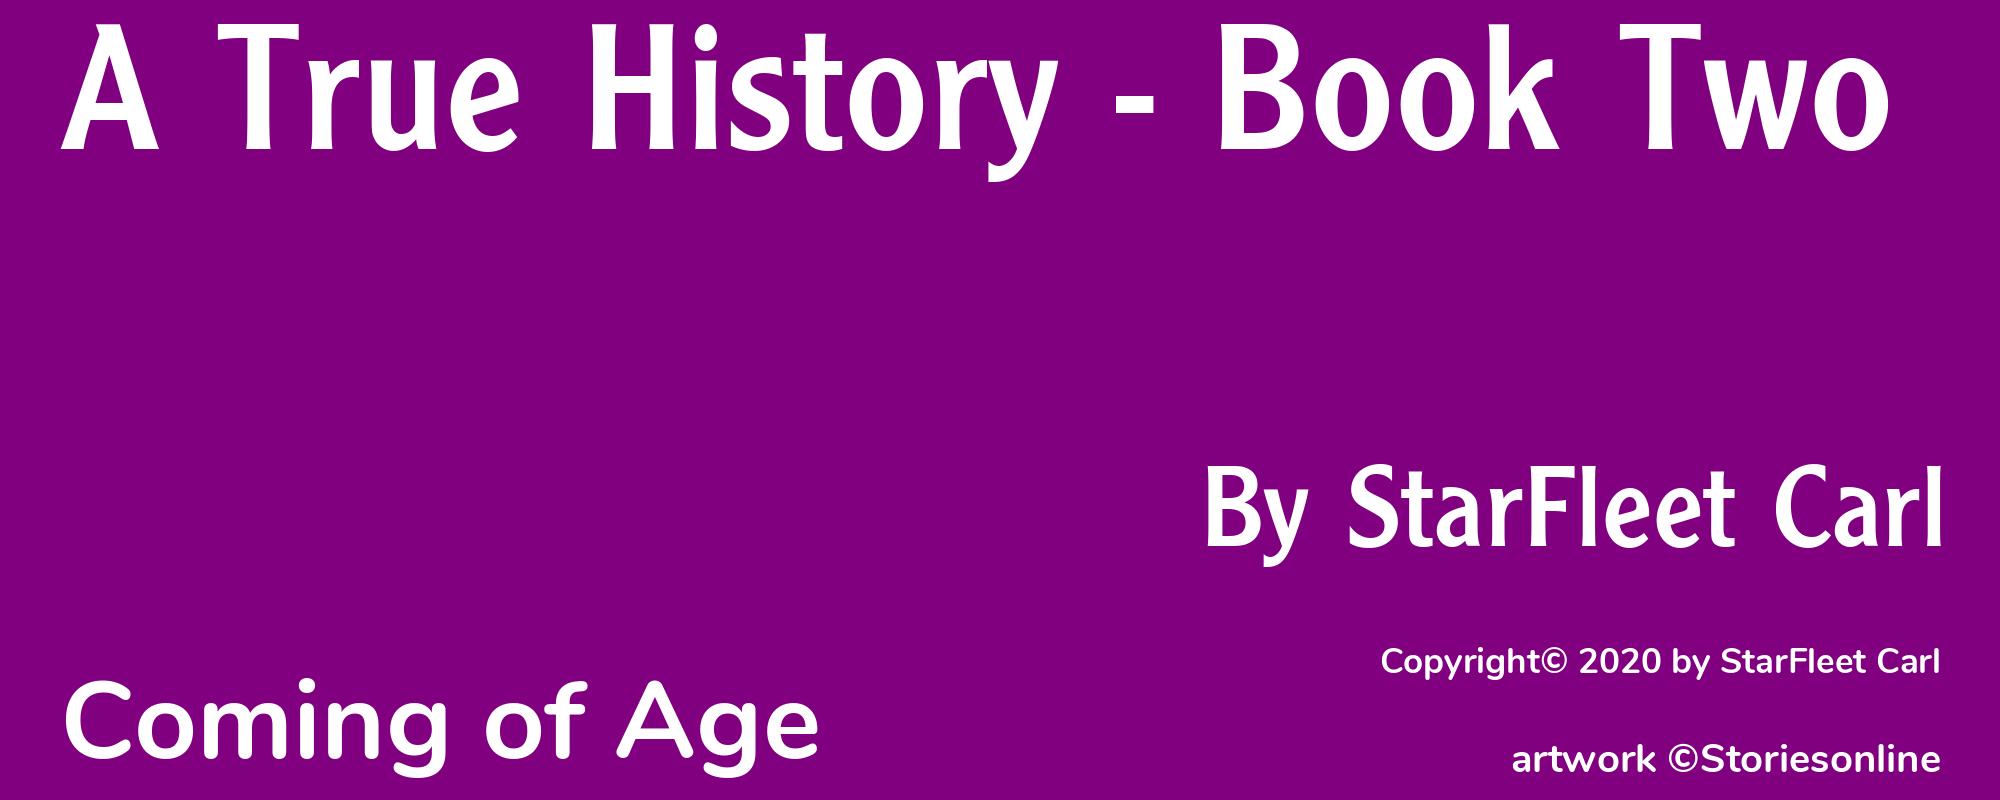 A True History - Book Two - Cover